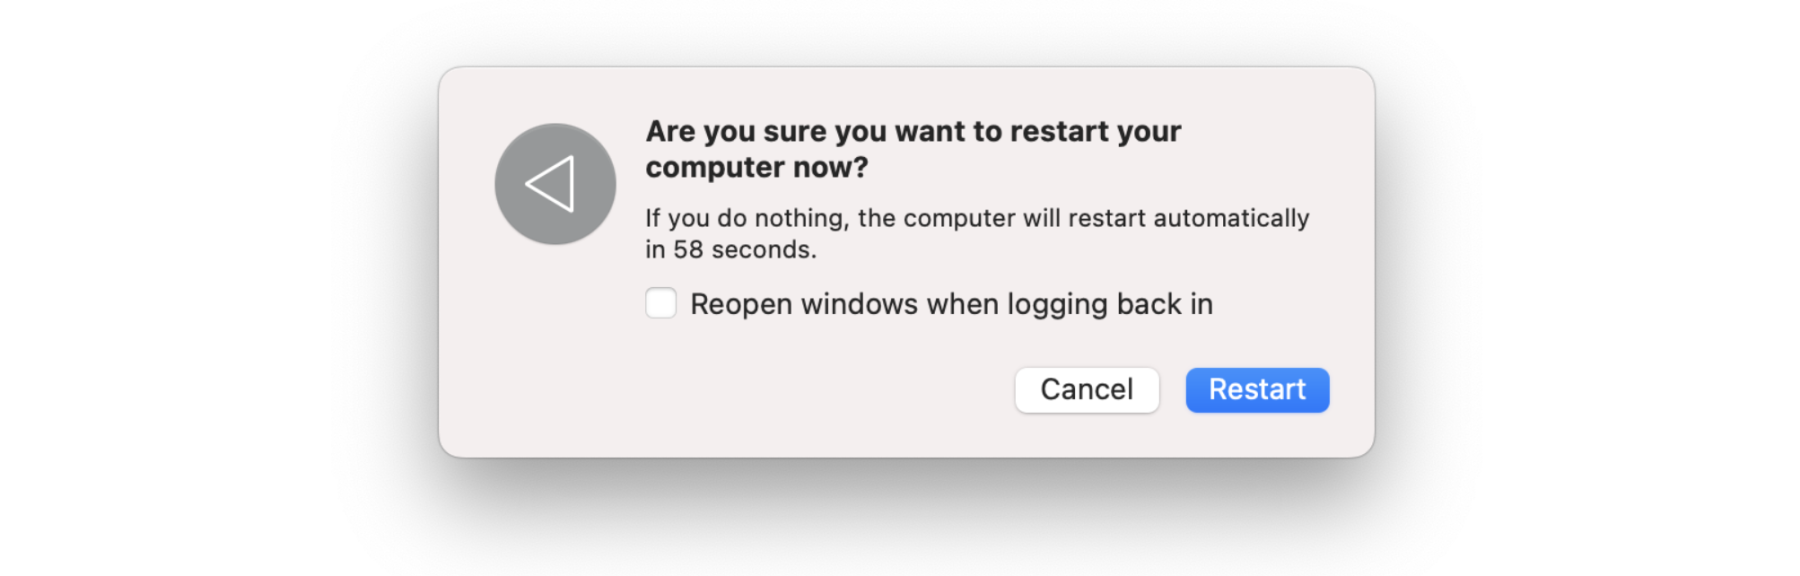 Don’t reopen applications when you reboot